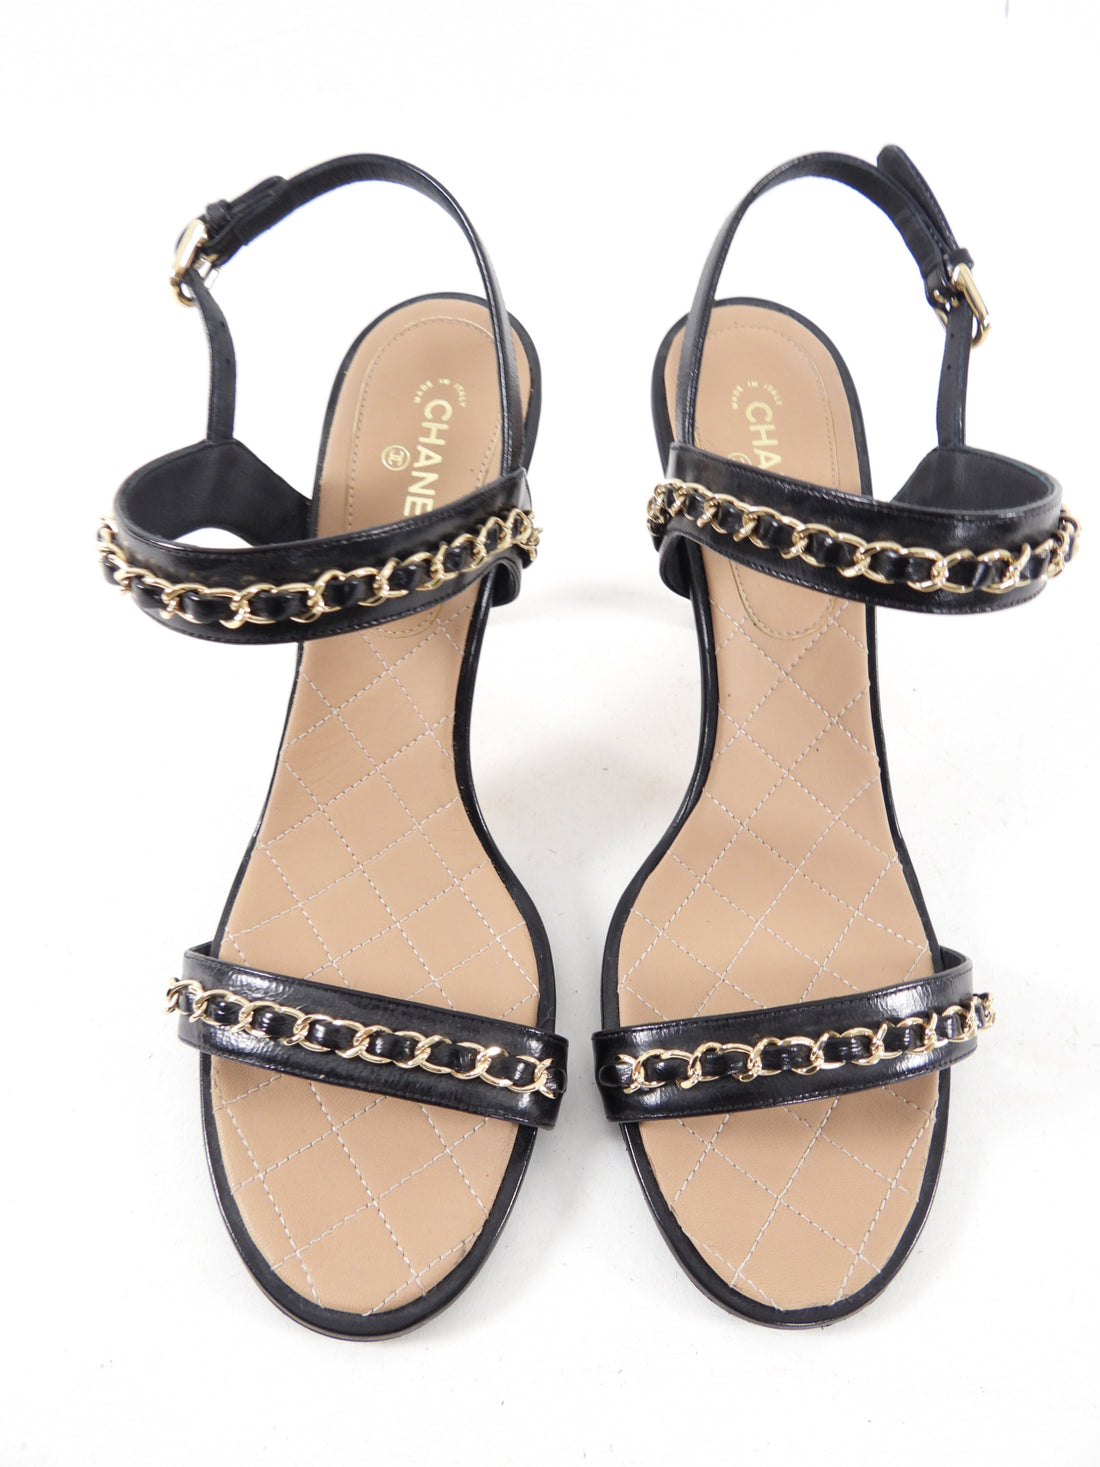 Chanel Black Quilted Leather Chain Sandals - 40